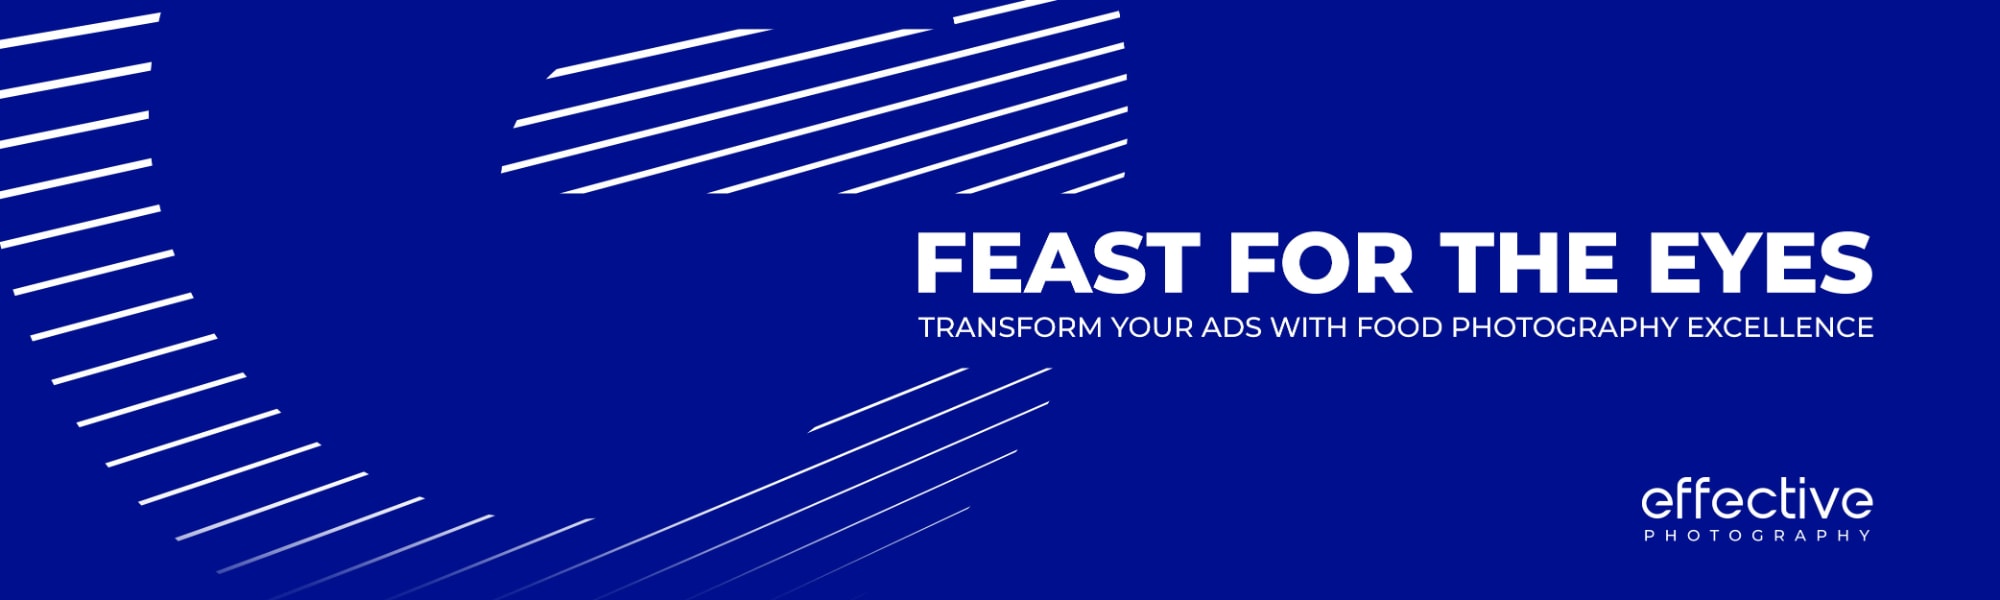 Feast for the Eyes Transform Your Ads with Food Photography Excellence